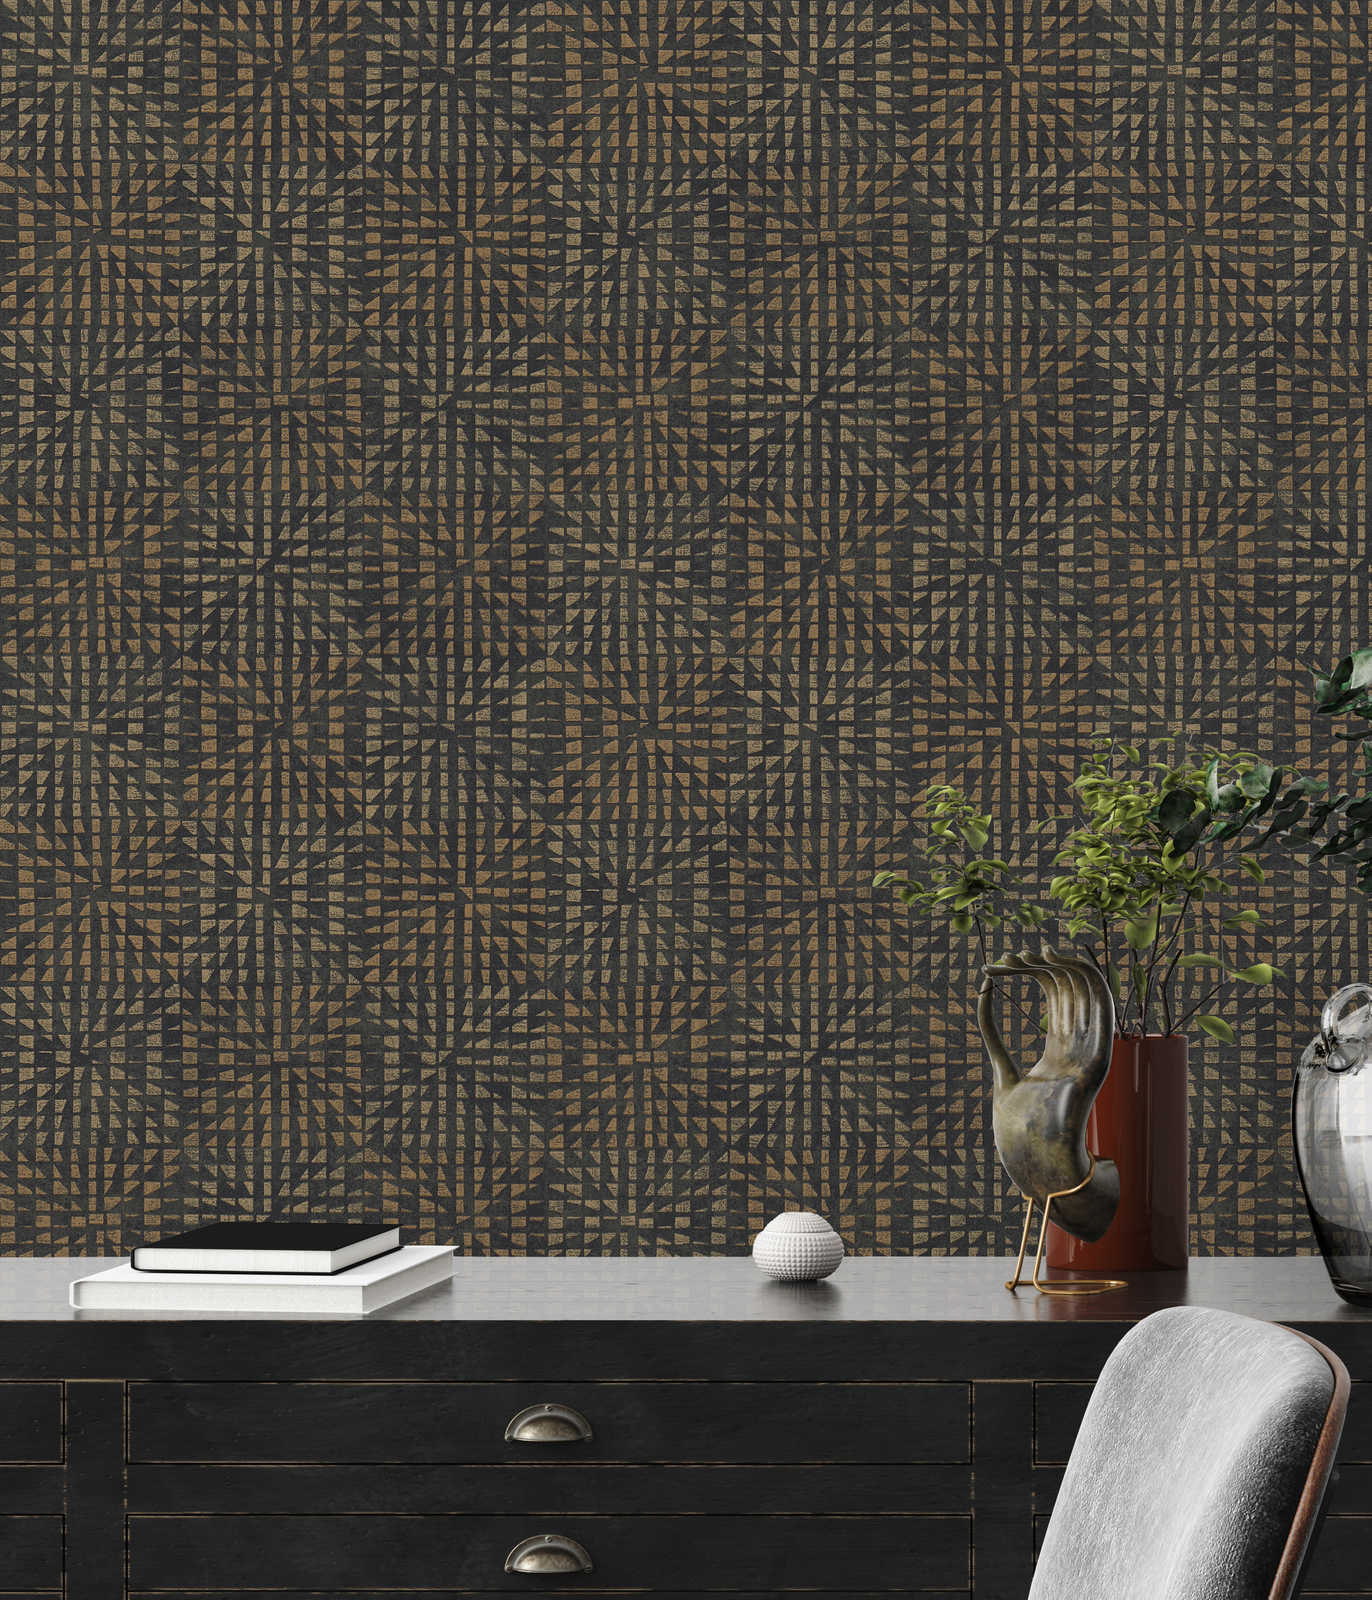             Ethno wallpaper with textured pattern & mosaic effect - black
        